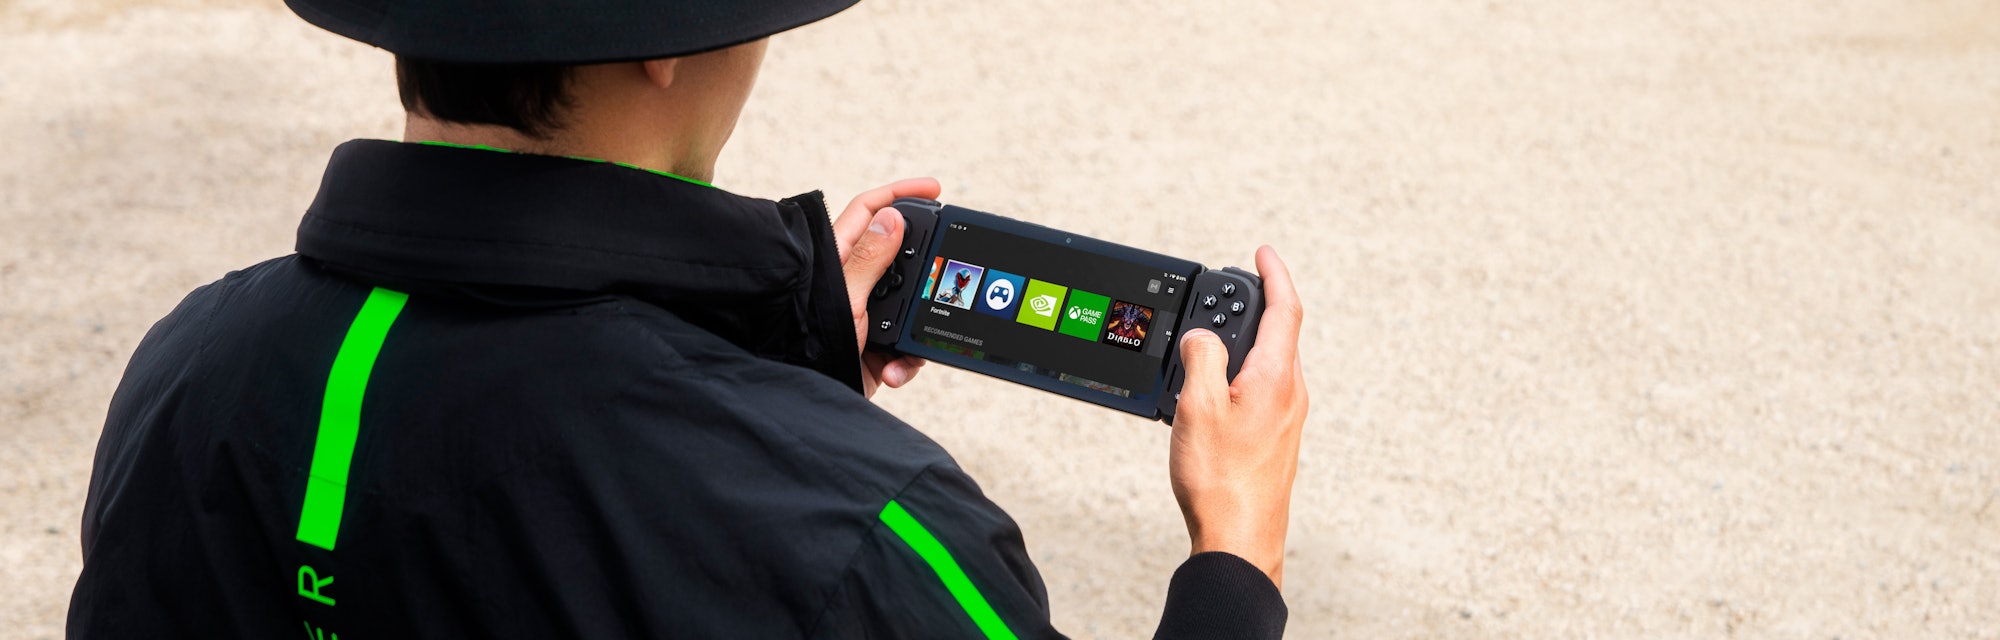 The Razer Edge handheld being used outside.